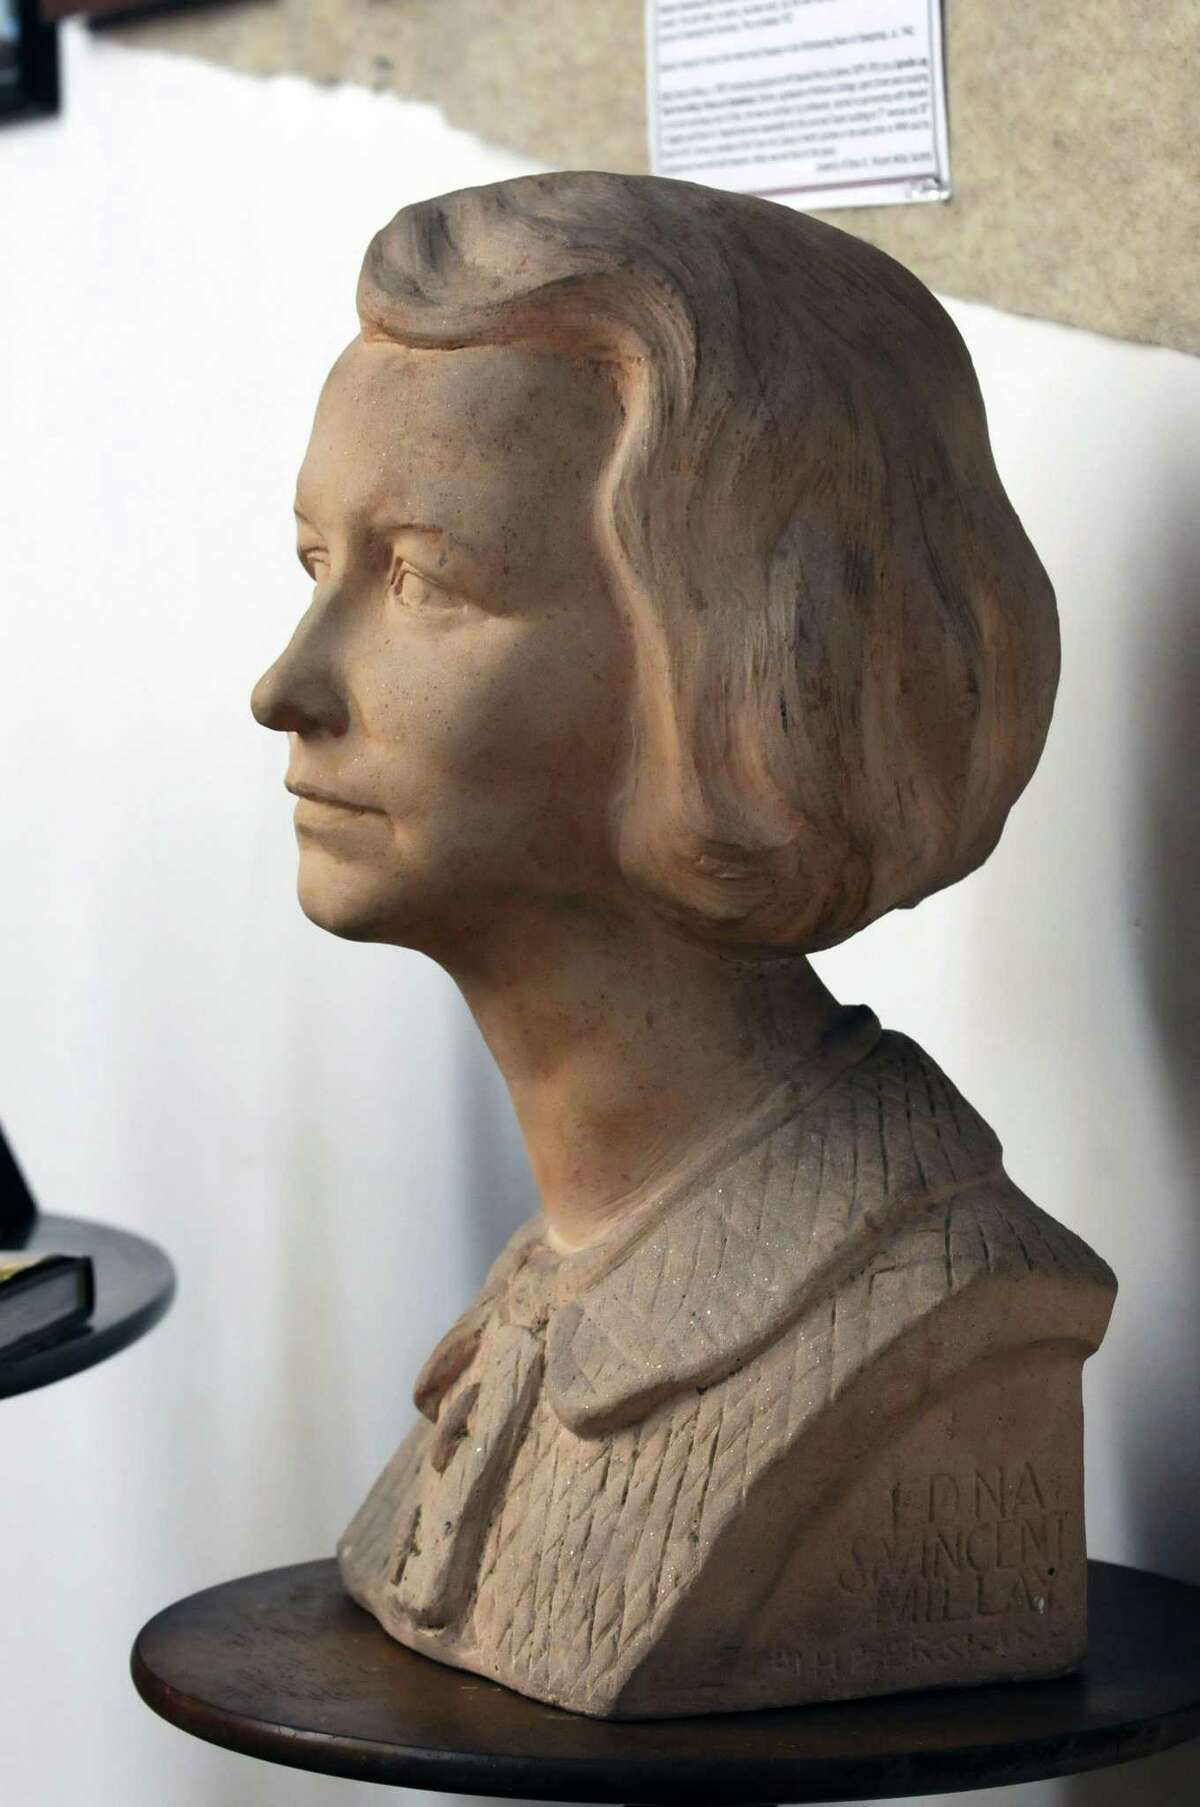 A bust of poet Edna St. Vincent Millay on display at the Edna St. Vincent Millay Society at Steepletop, in Austerlitz, NY on Thursday May 27, 2010. The Pulitzer Prize-winning poet's home, is being opened to the public for the first time to tours on May 28. FOR PAUL GRONDAHL STORY. ( Philip Kamrass / Times Union)